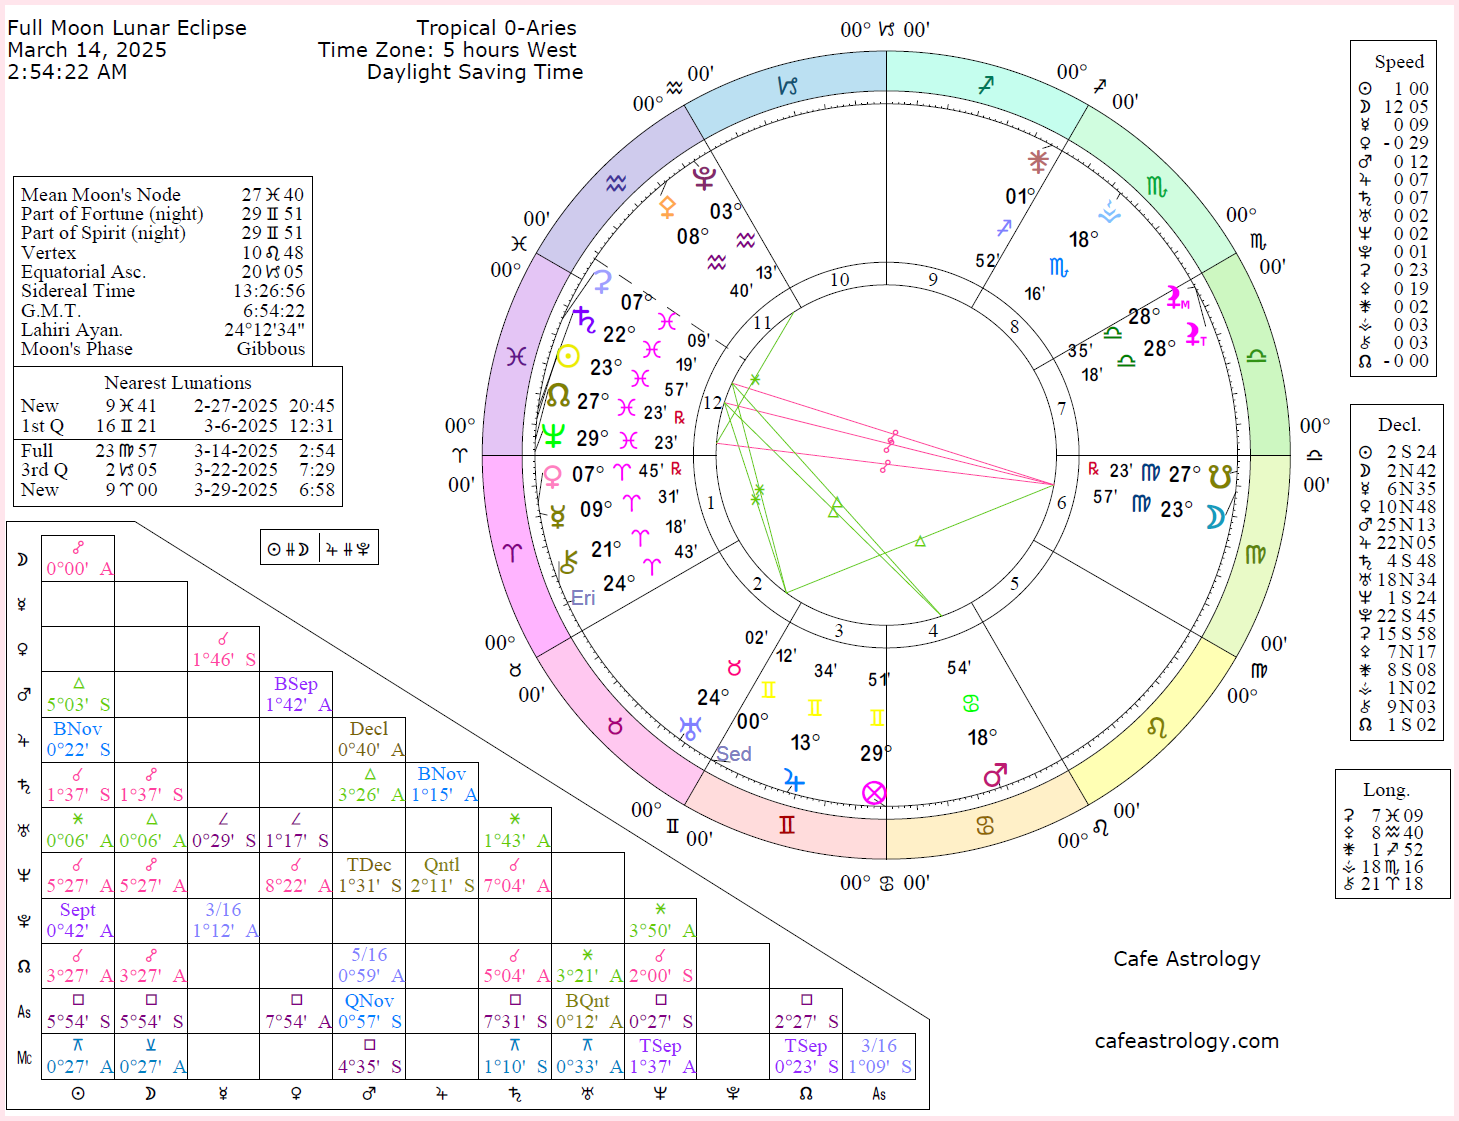 Full Moon/Lunar Eclipse on March 14, 2025 Cafe Astrology